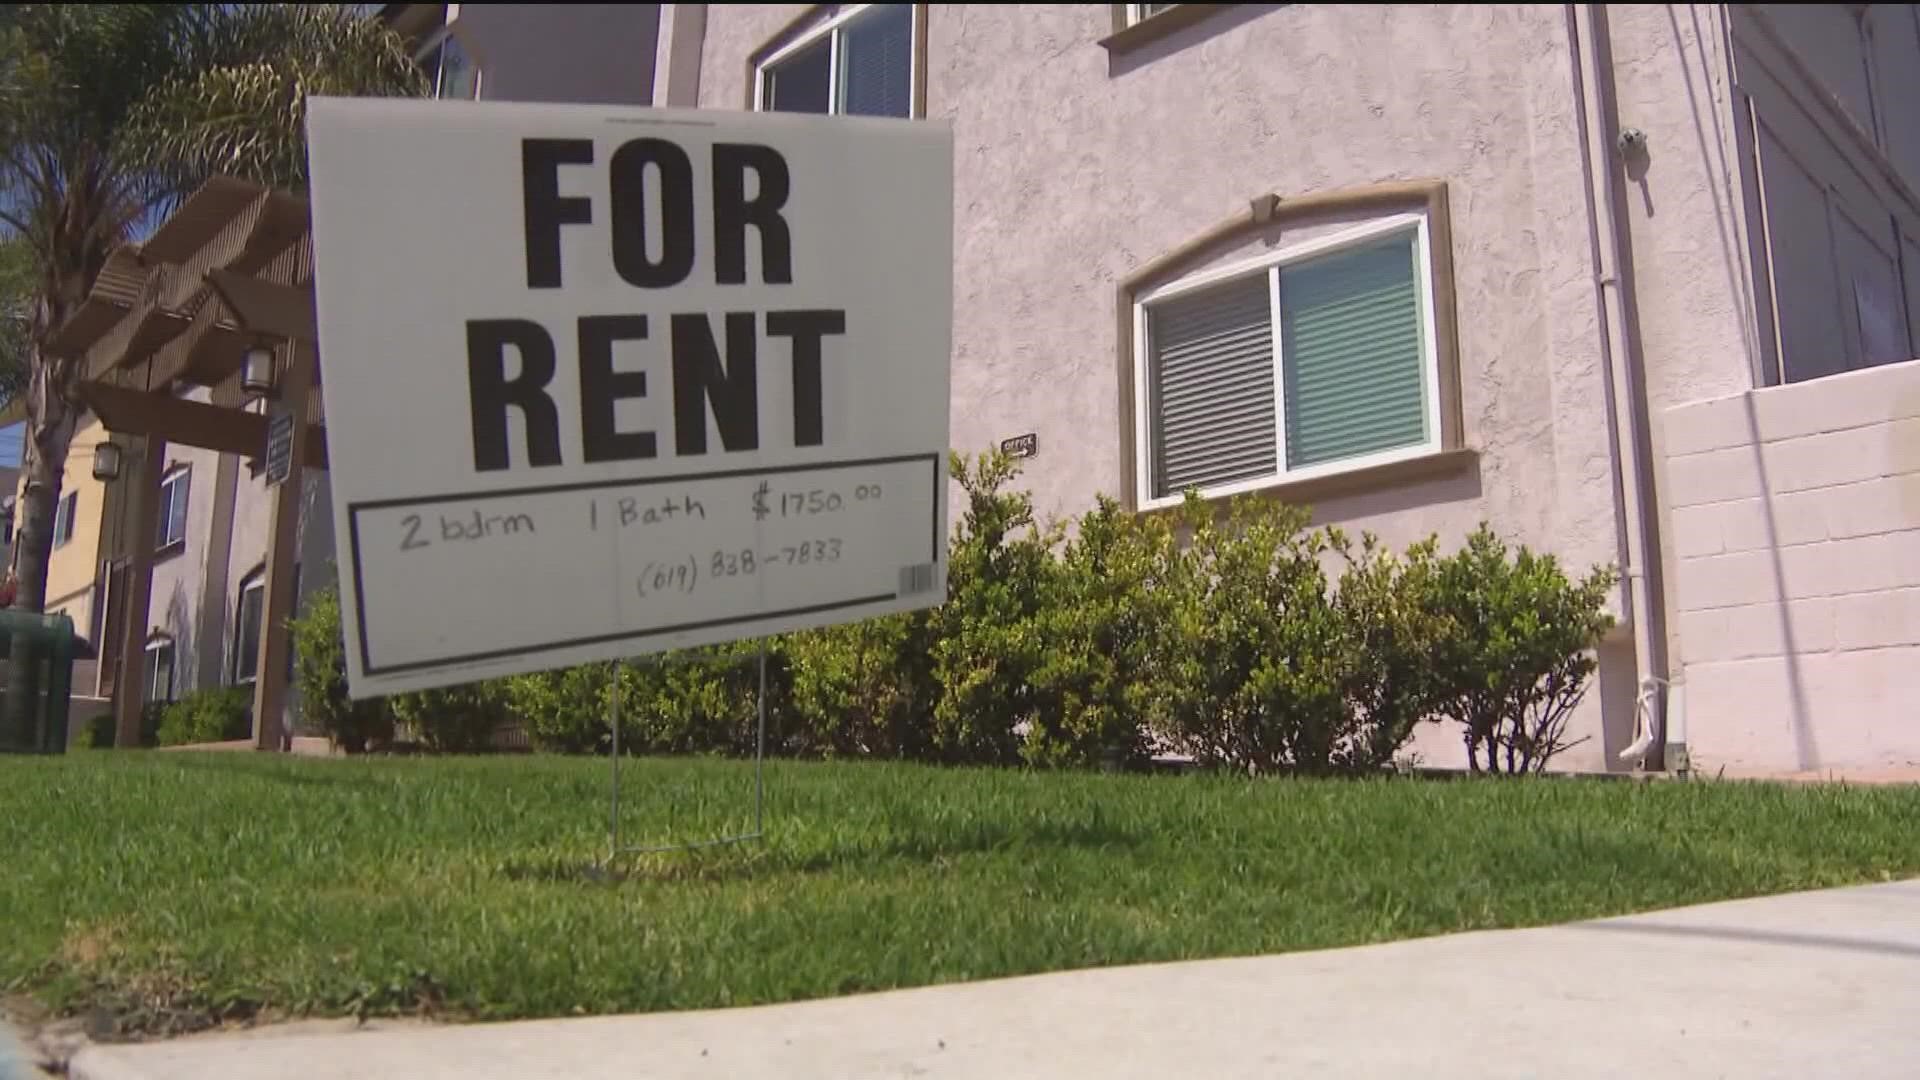 A California law caps annual rent increases at 5% plus an inflationary figure, because inflation is so high the requirement is capped at 10%.